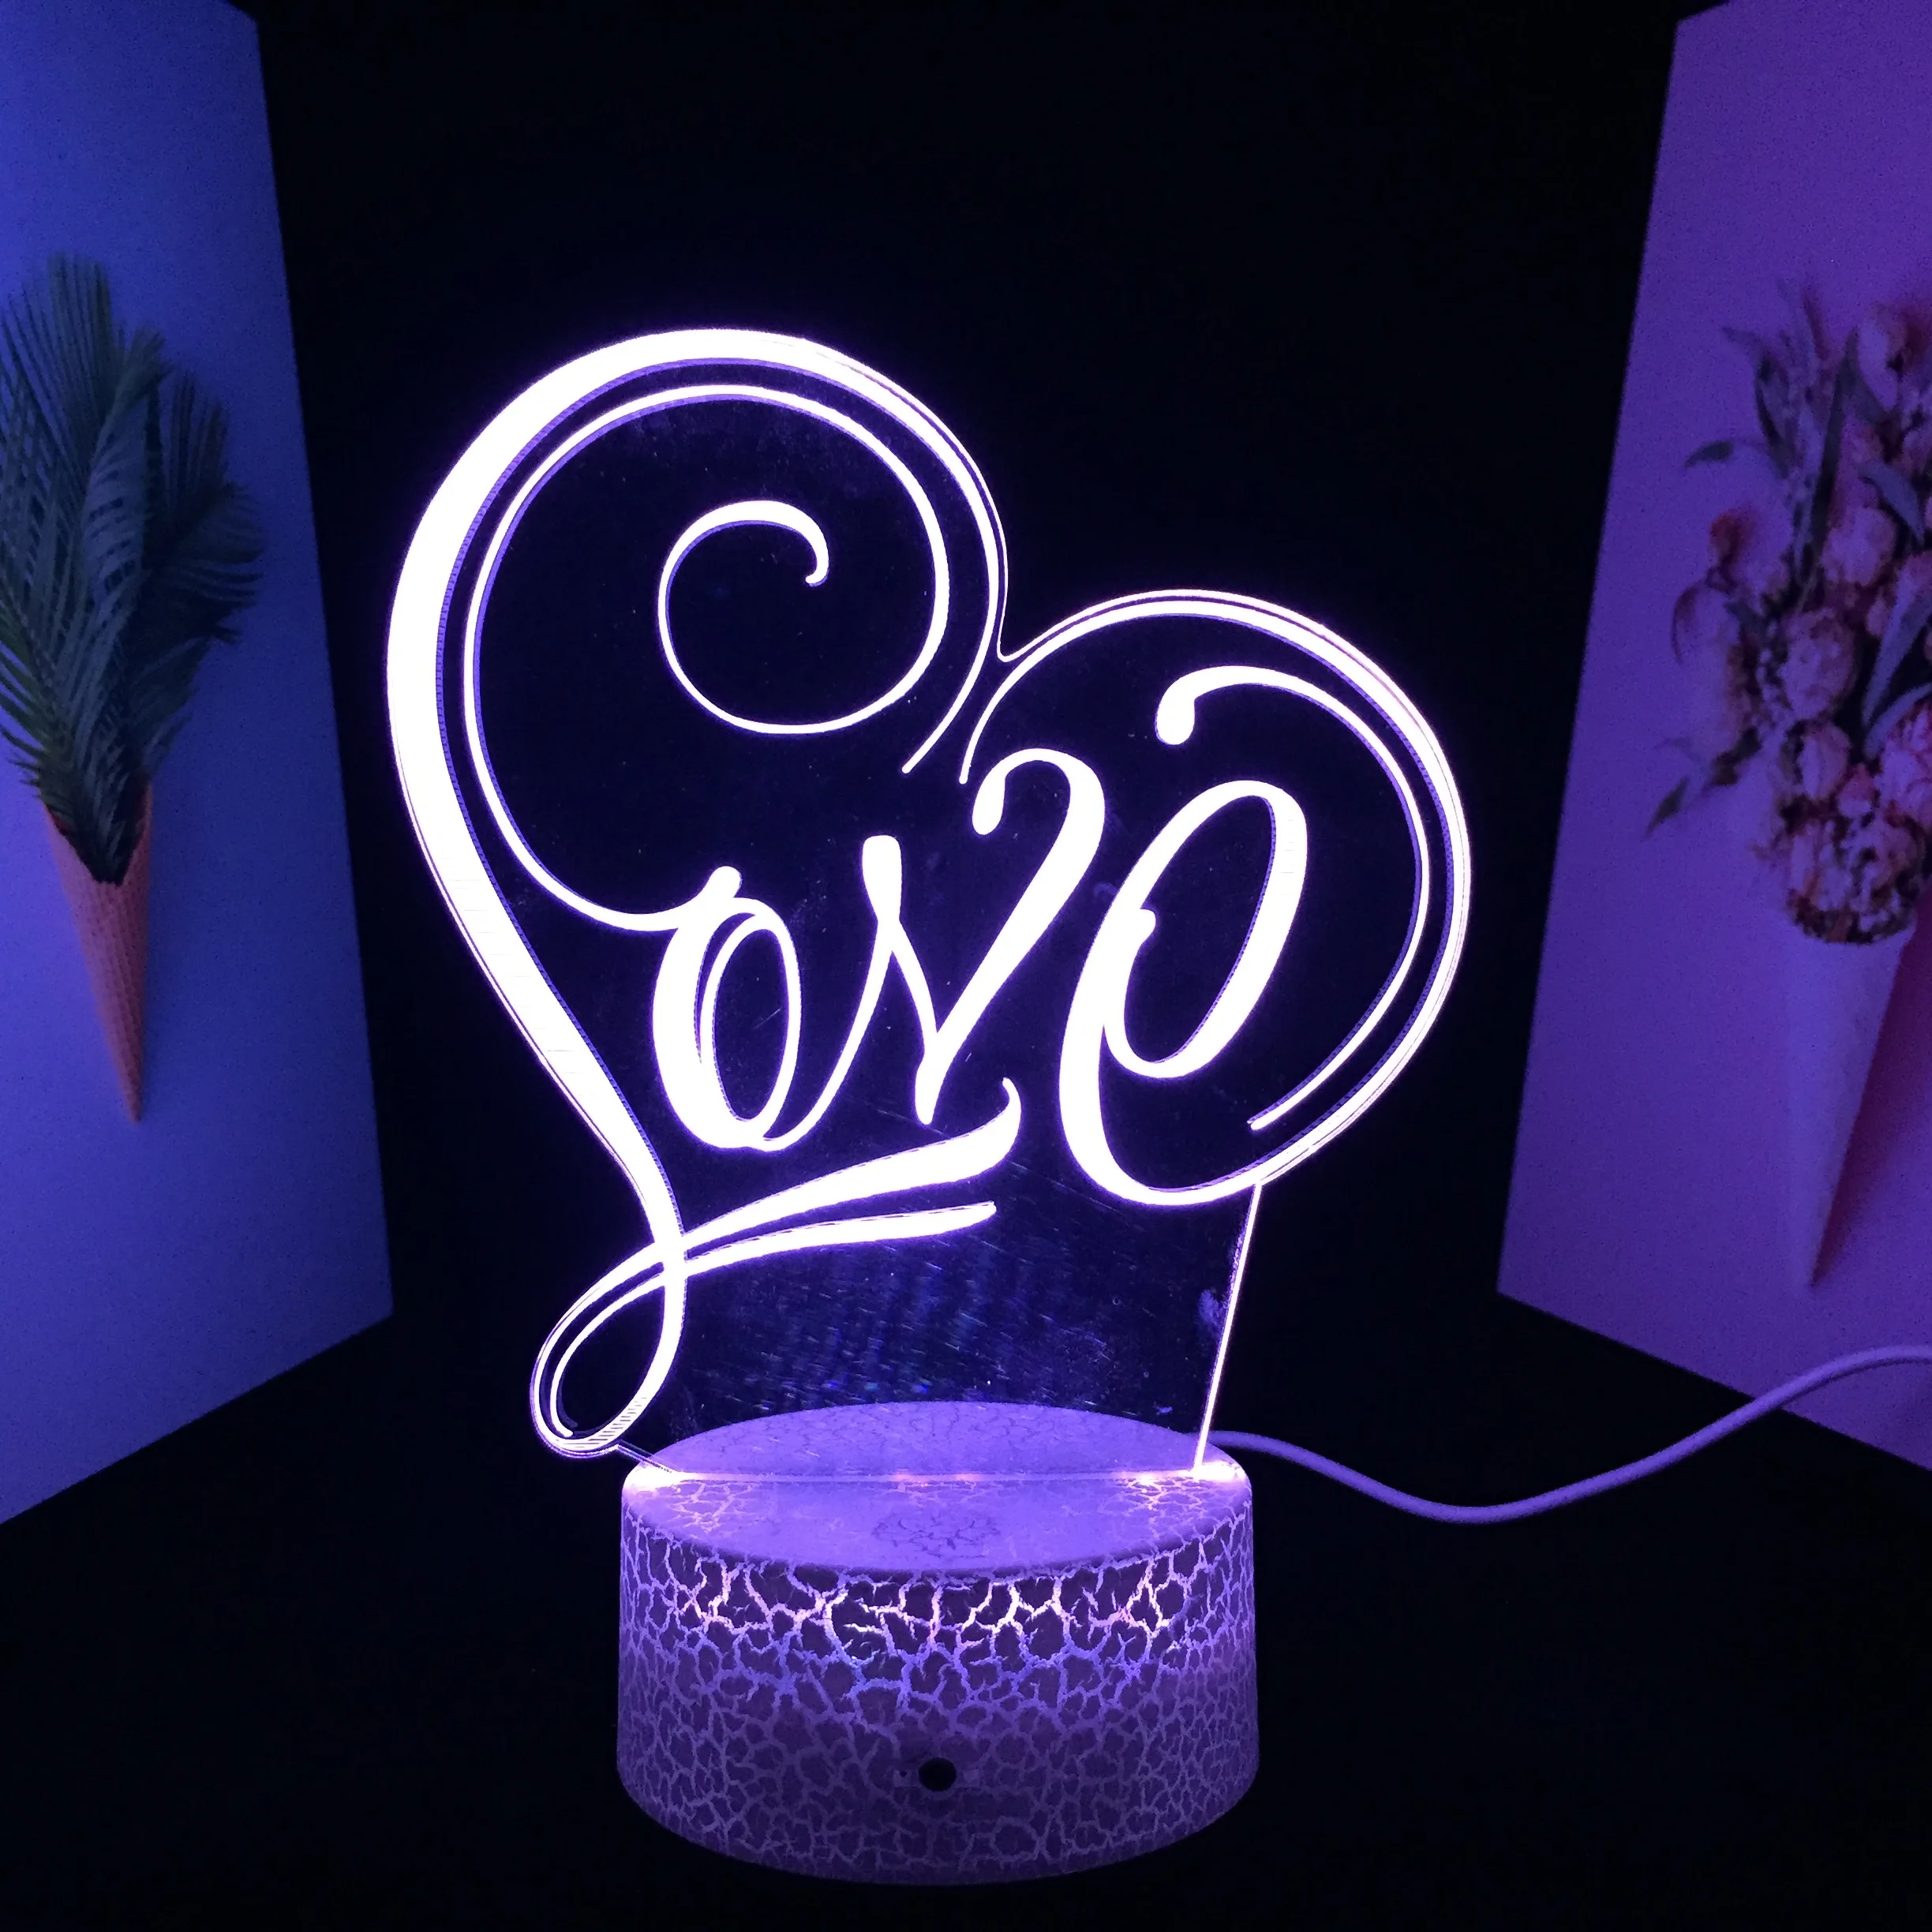 

Valentine's Day Gifts 3D LED Night Light for Wedding Home Room Decor Proposal Atmosphere Light Boy Friend or Girl Friend Gift